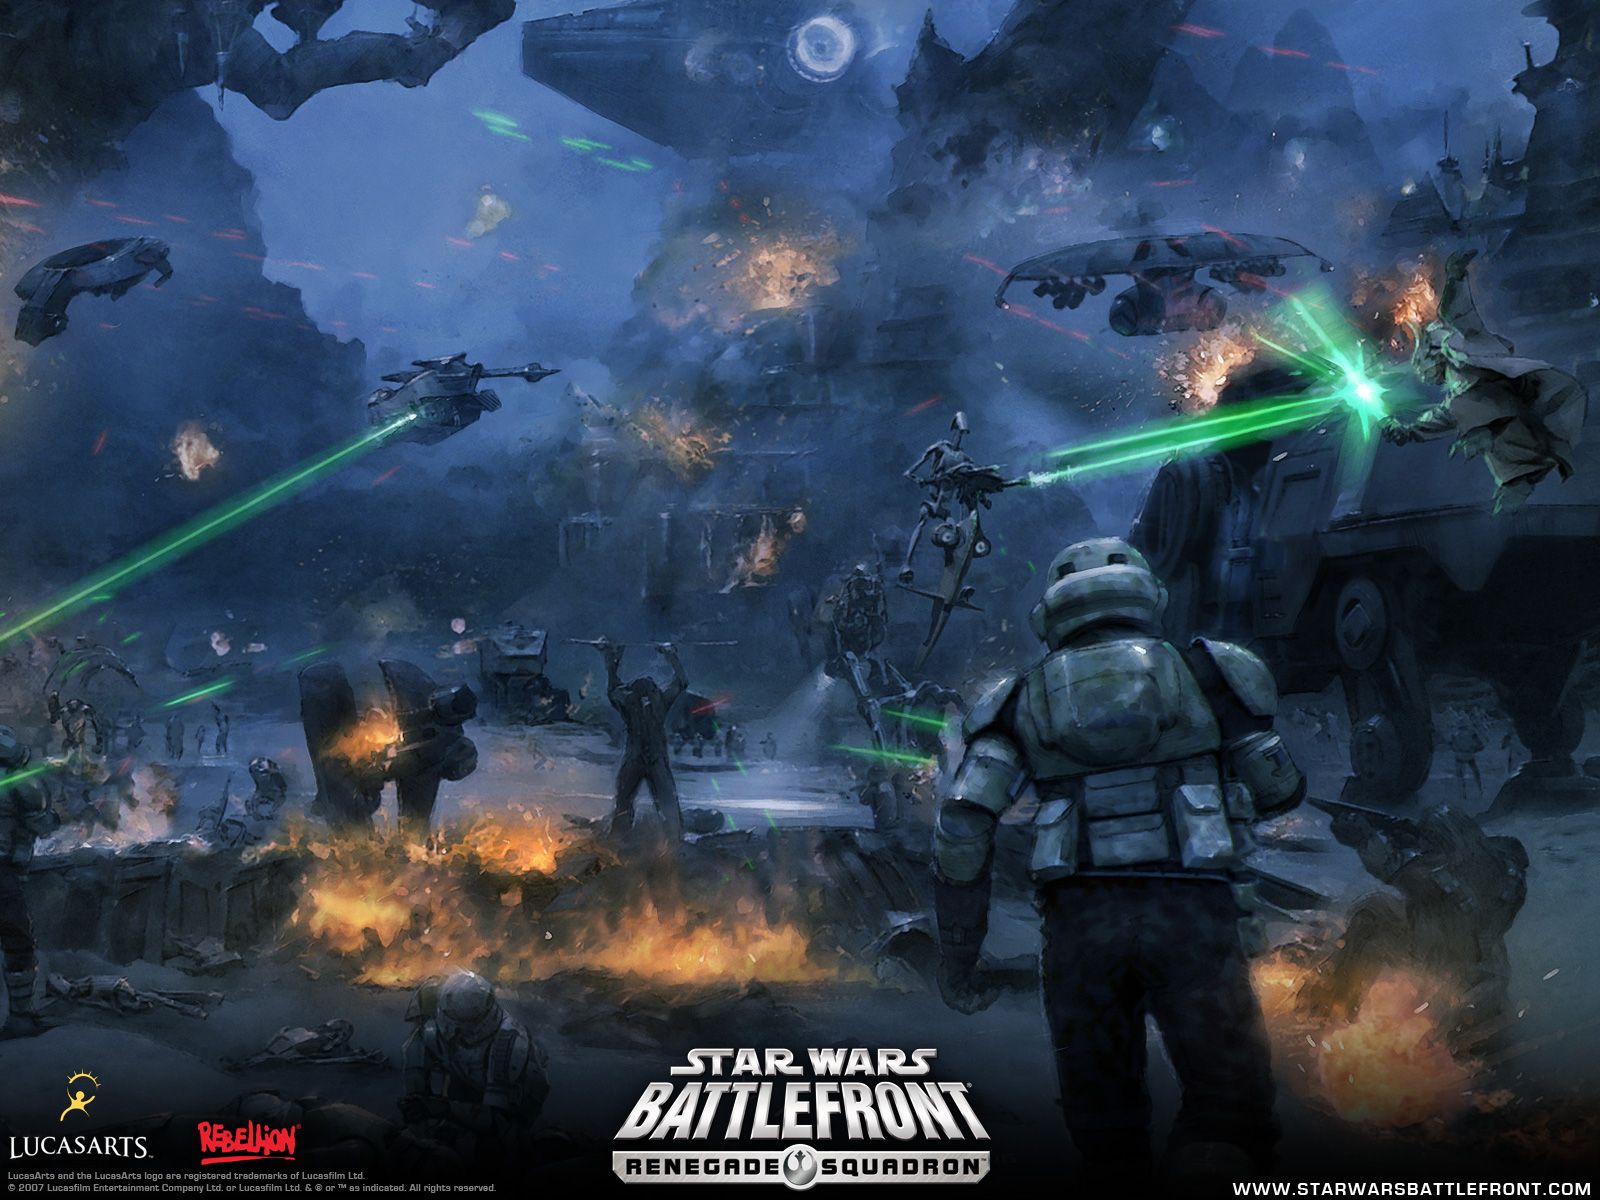 Star Wars Battlefront Is Not Dice Creates Own